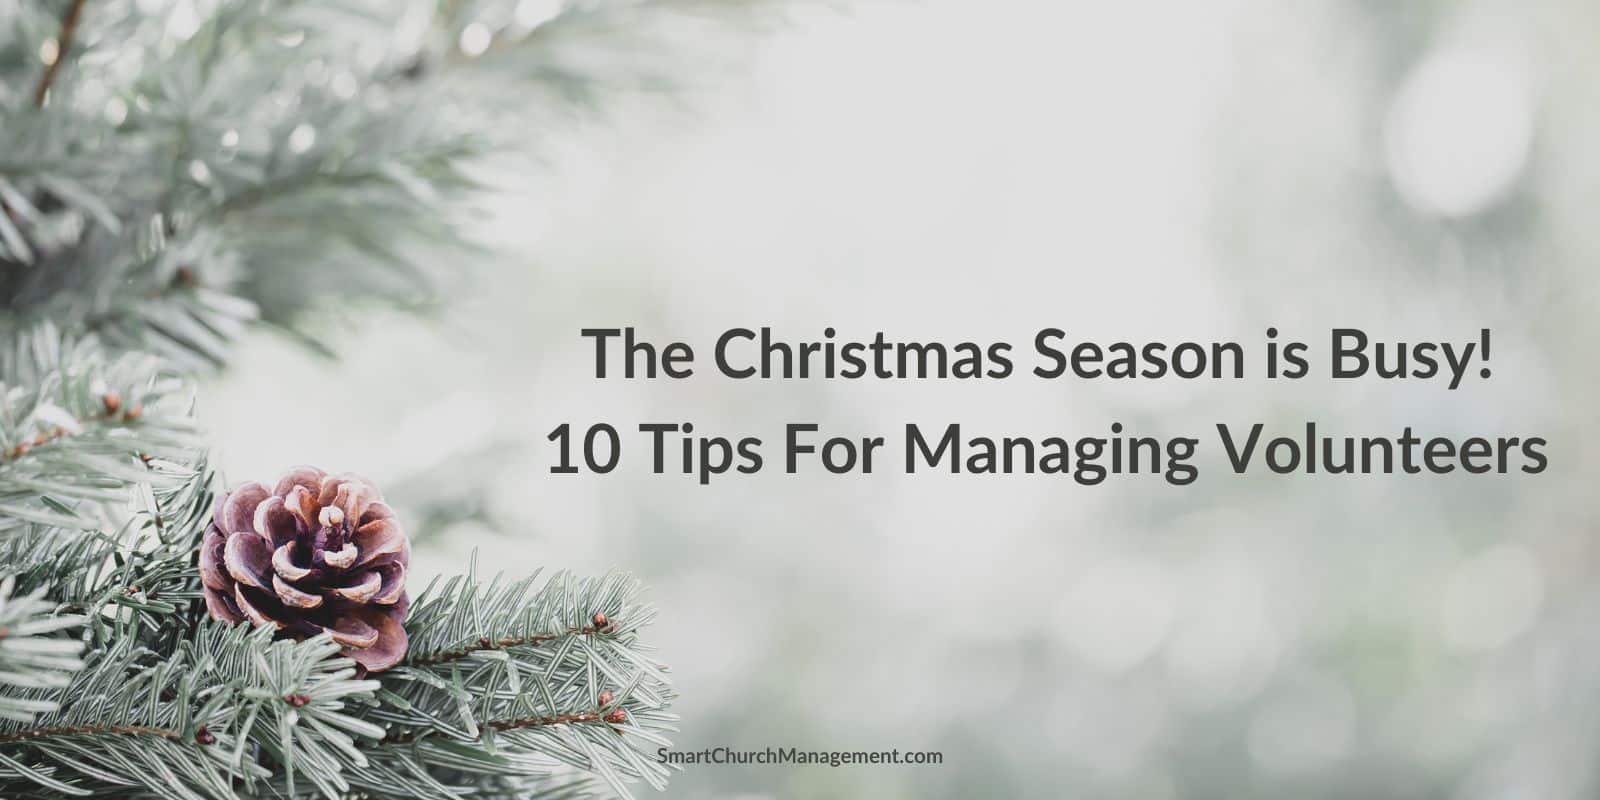 How to manage volunteers during christmas season.